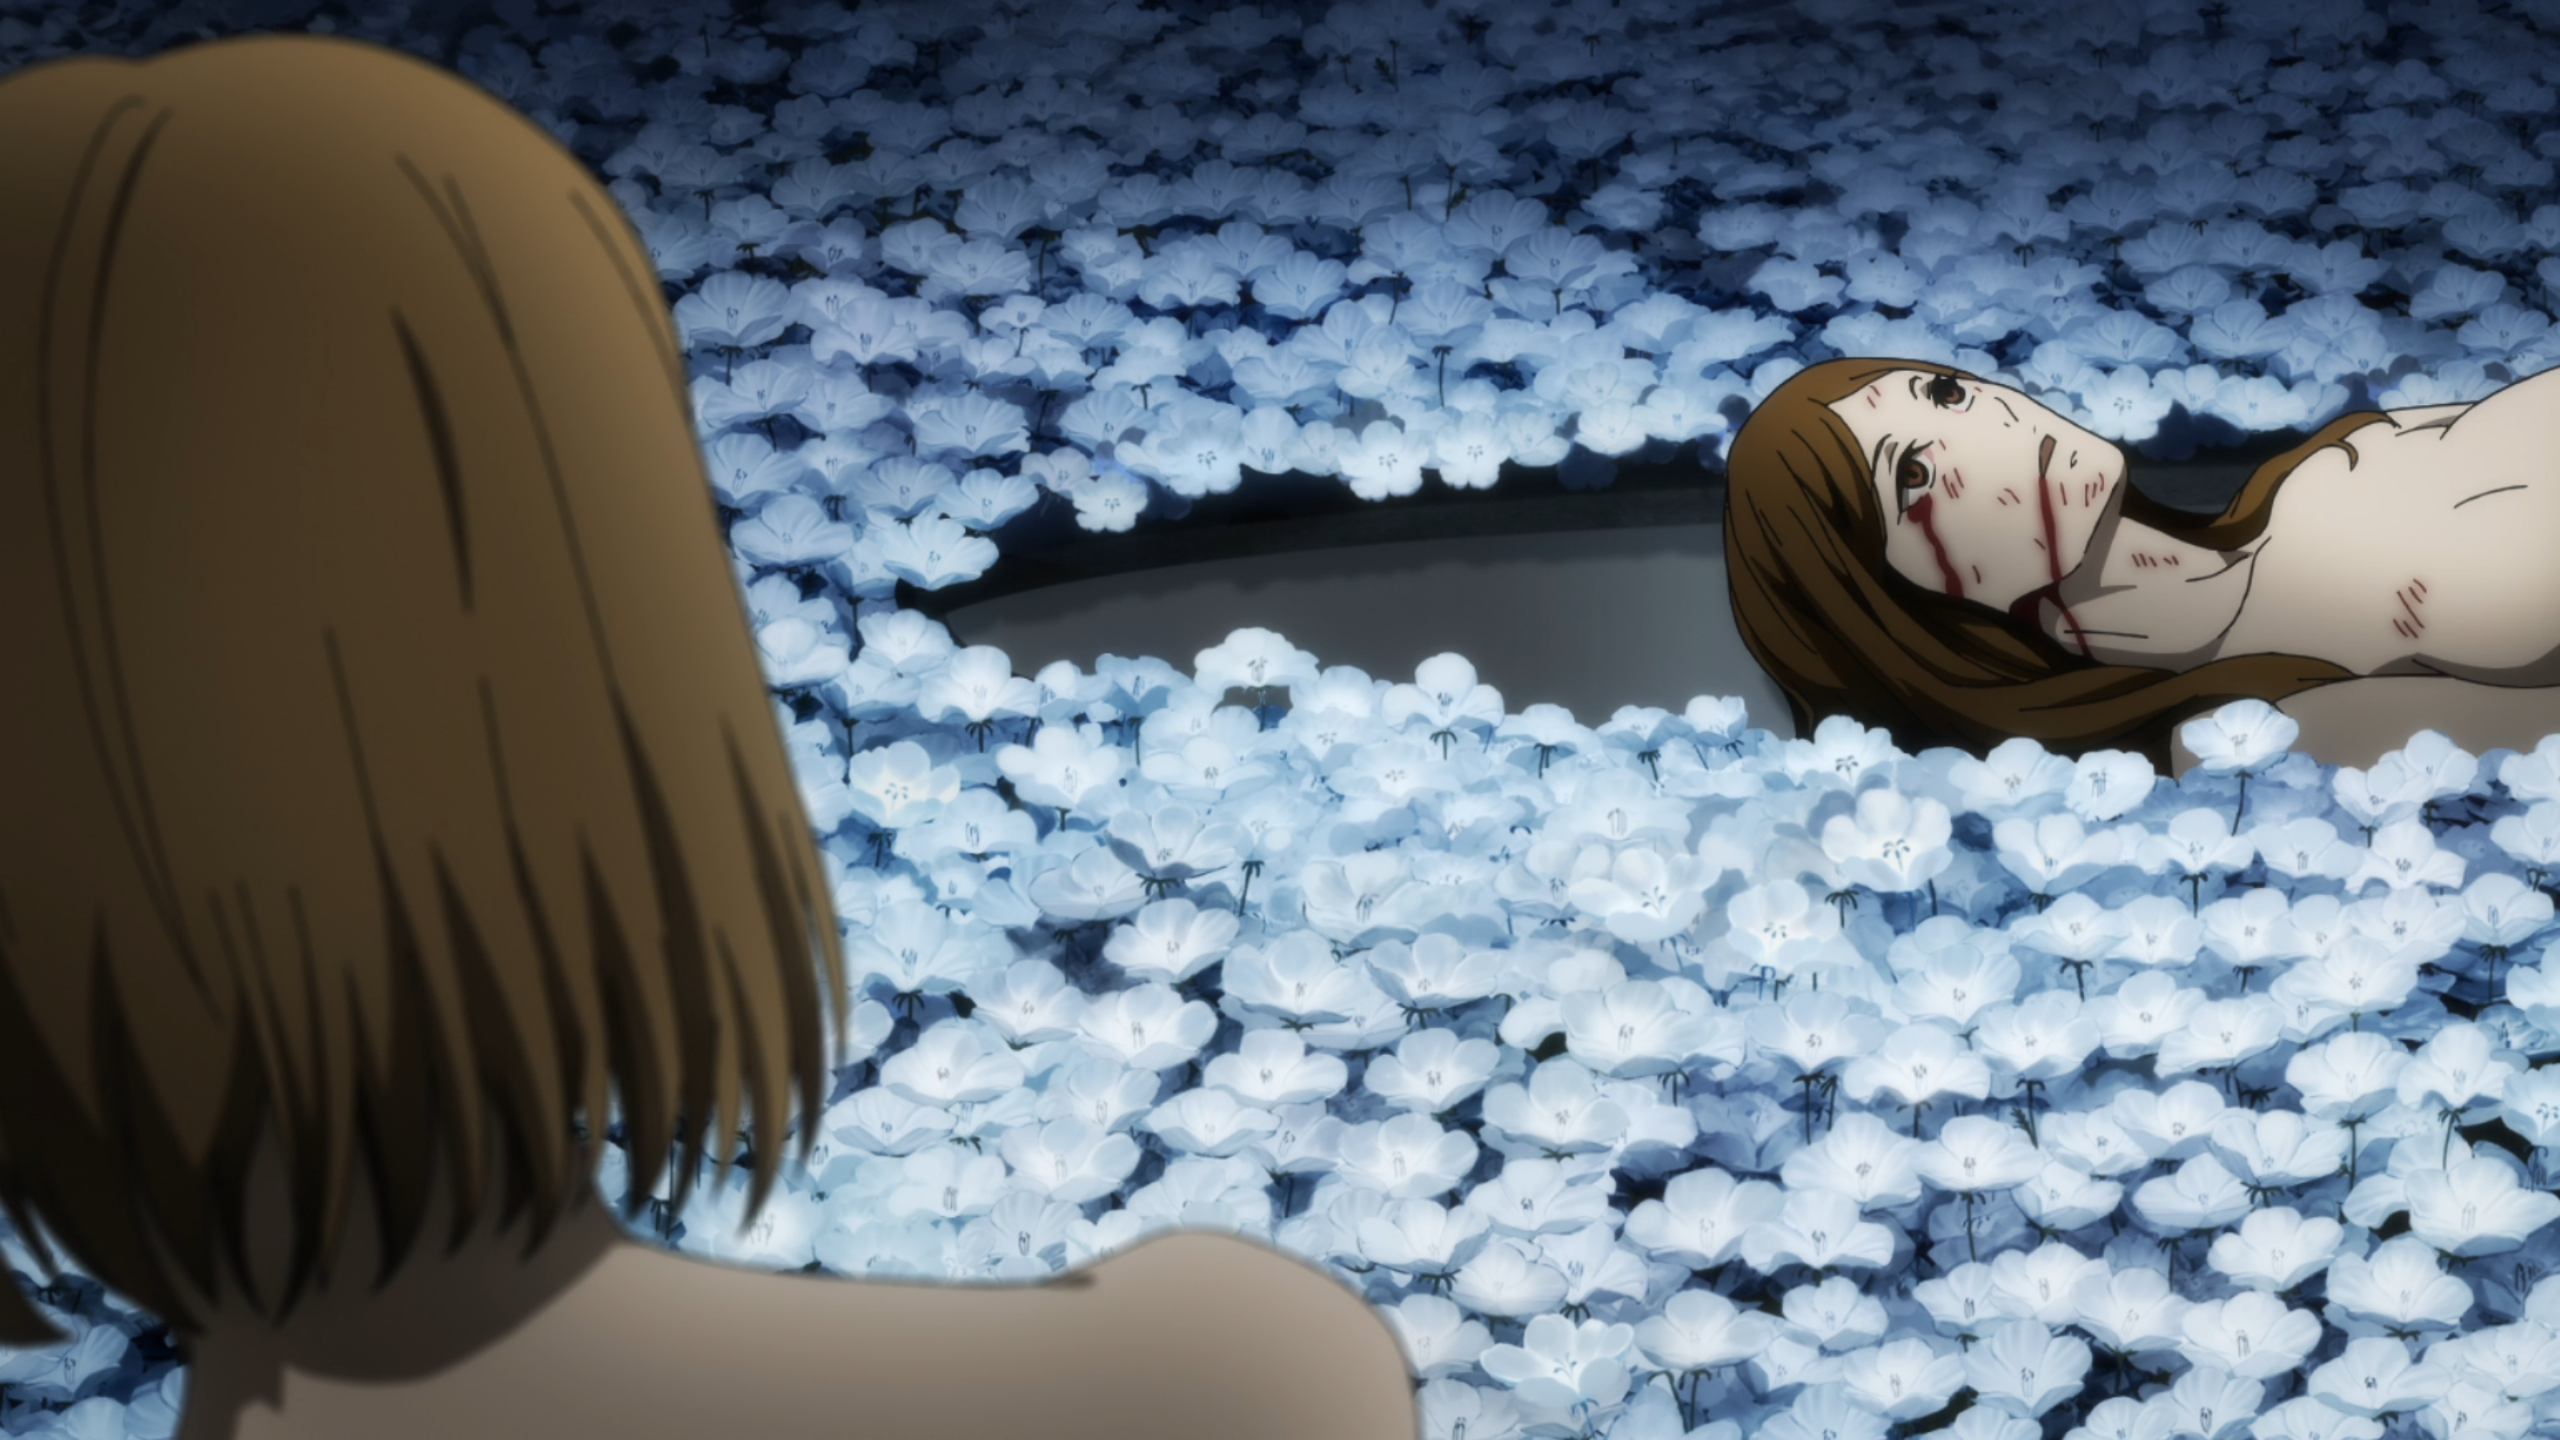 Naked human body in a field of white flower petals